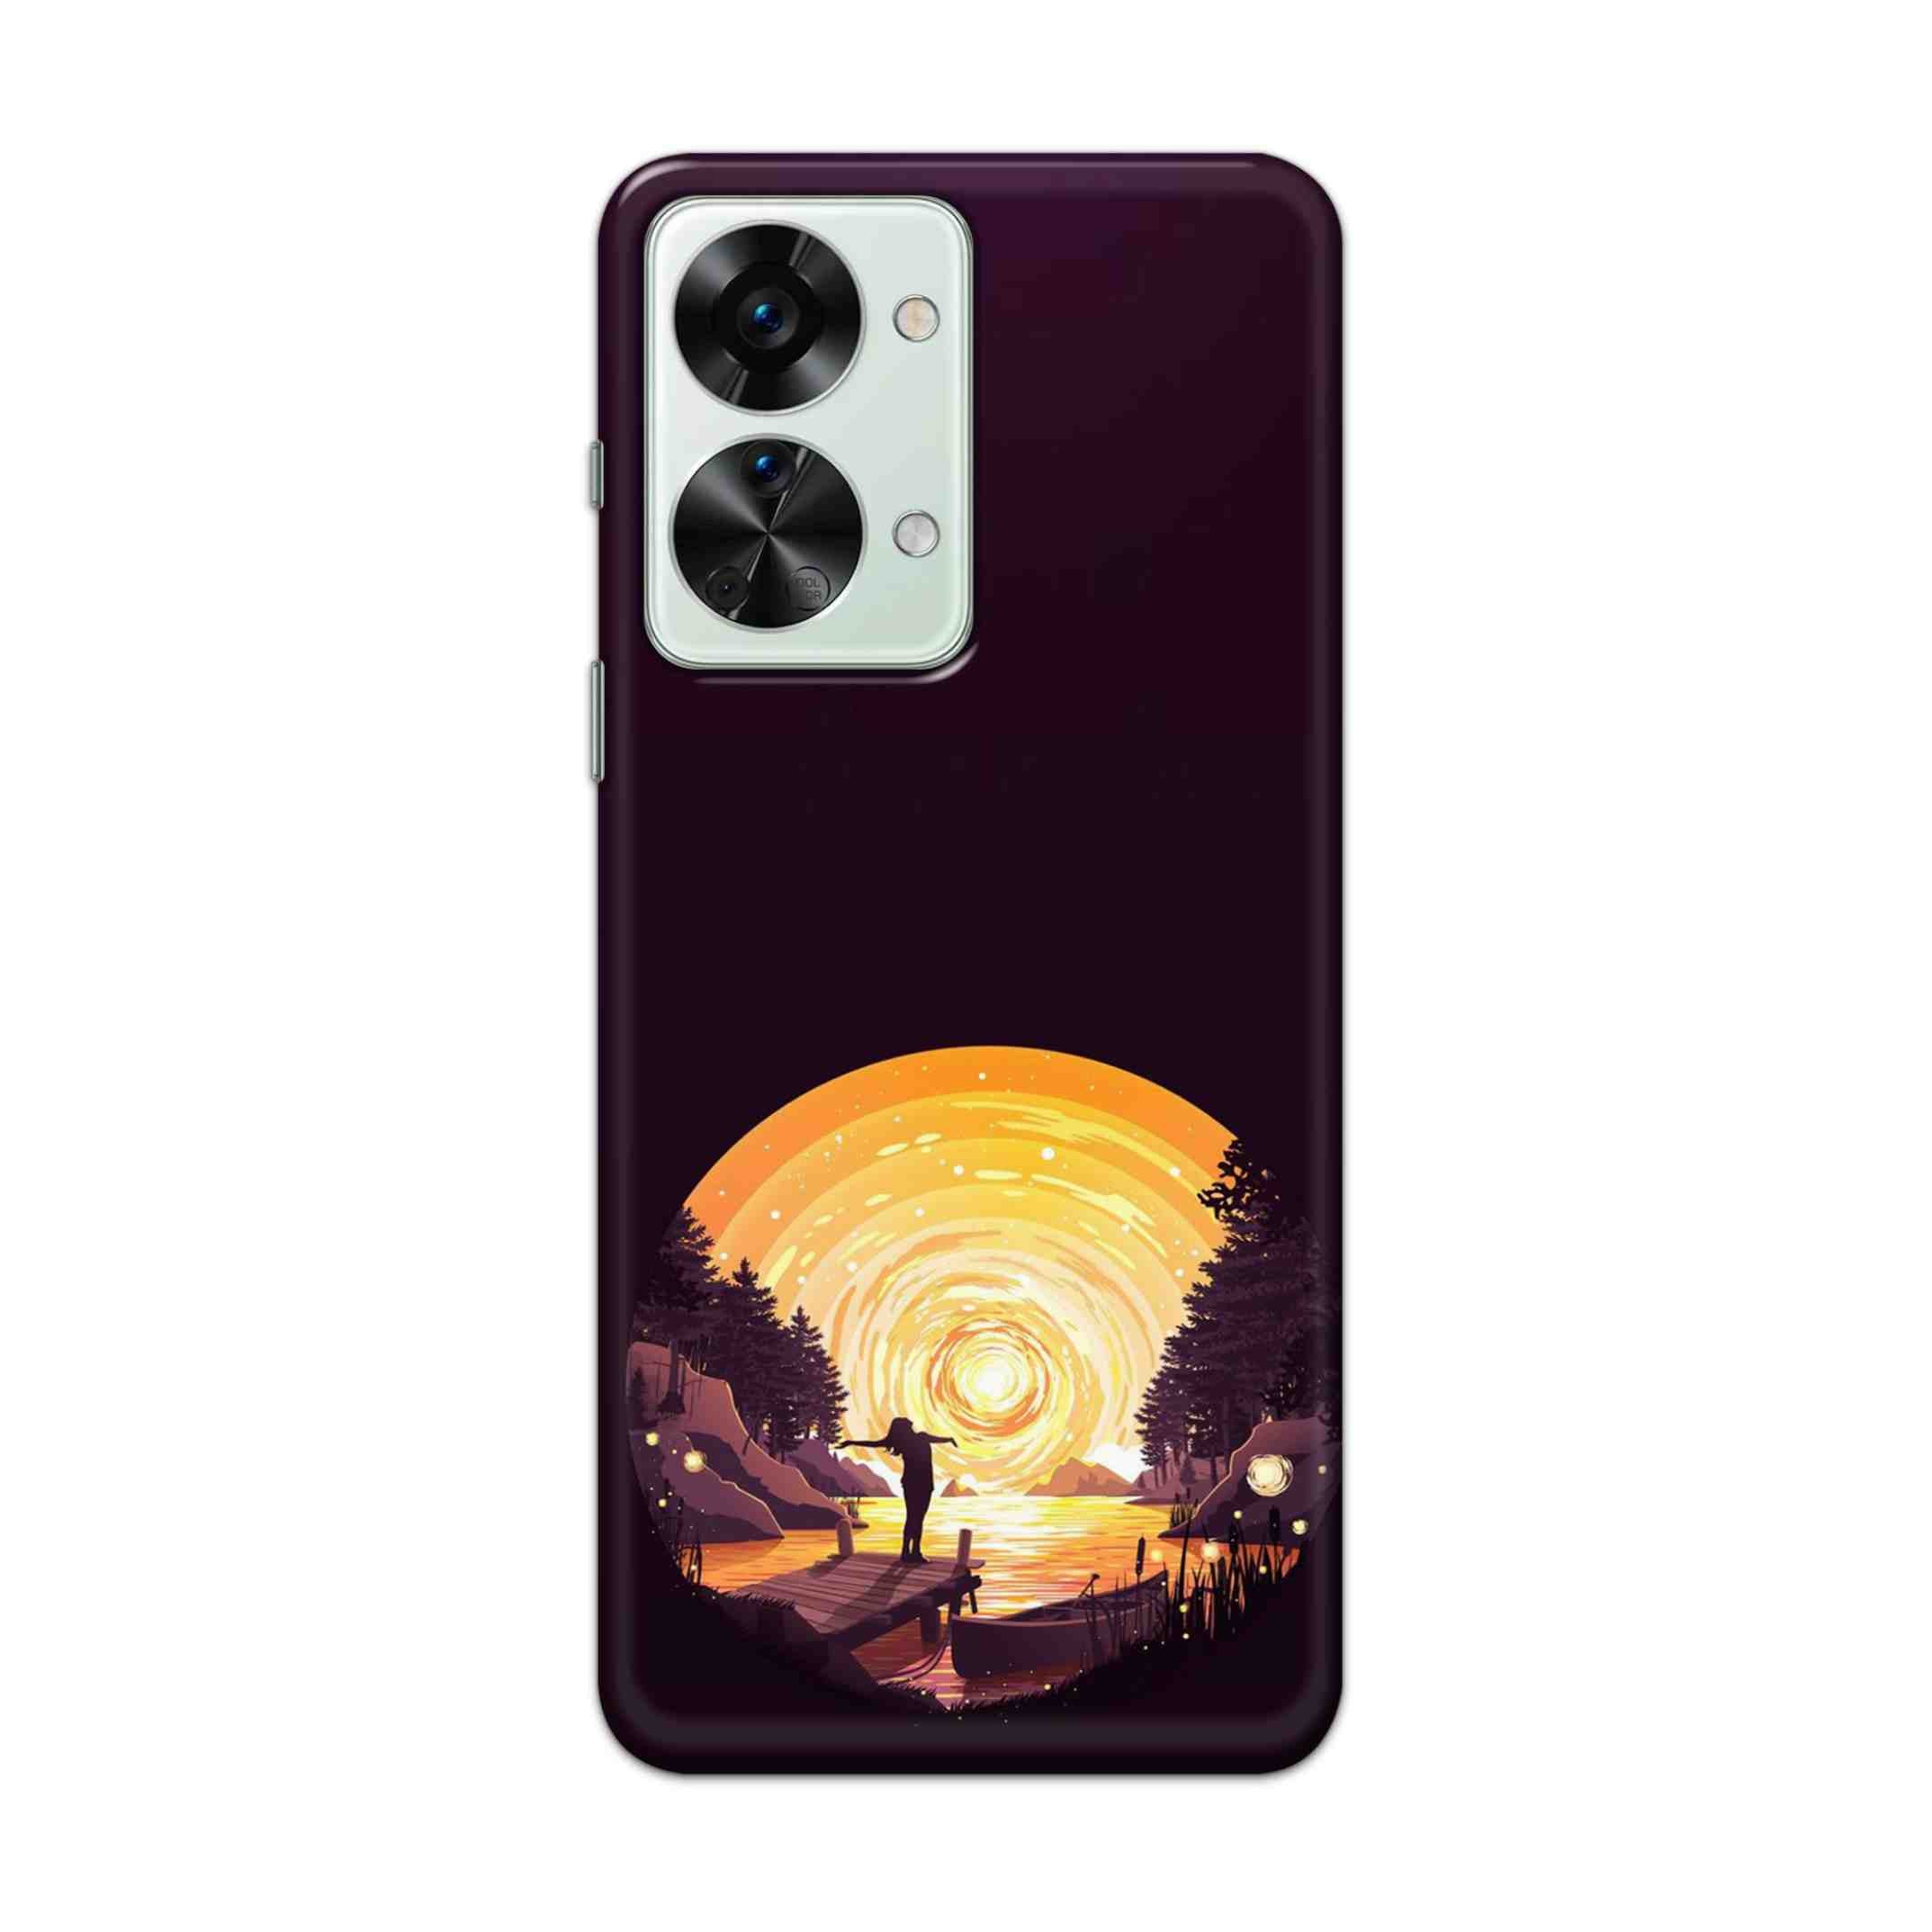 Buy Night Sunrise Hard Back Mobile Phone Case Cover For OnePlus Nord 2T 5G Online